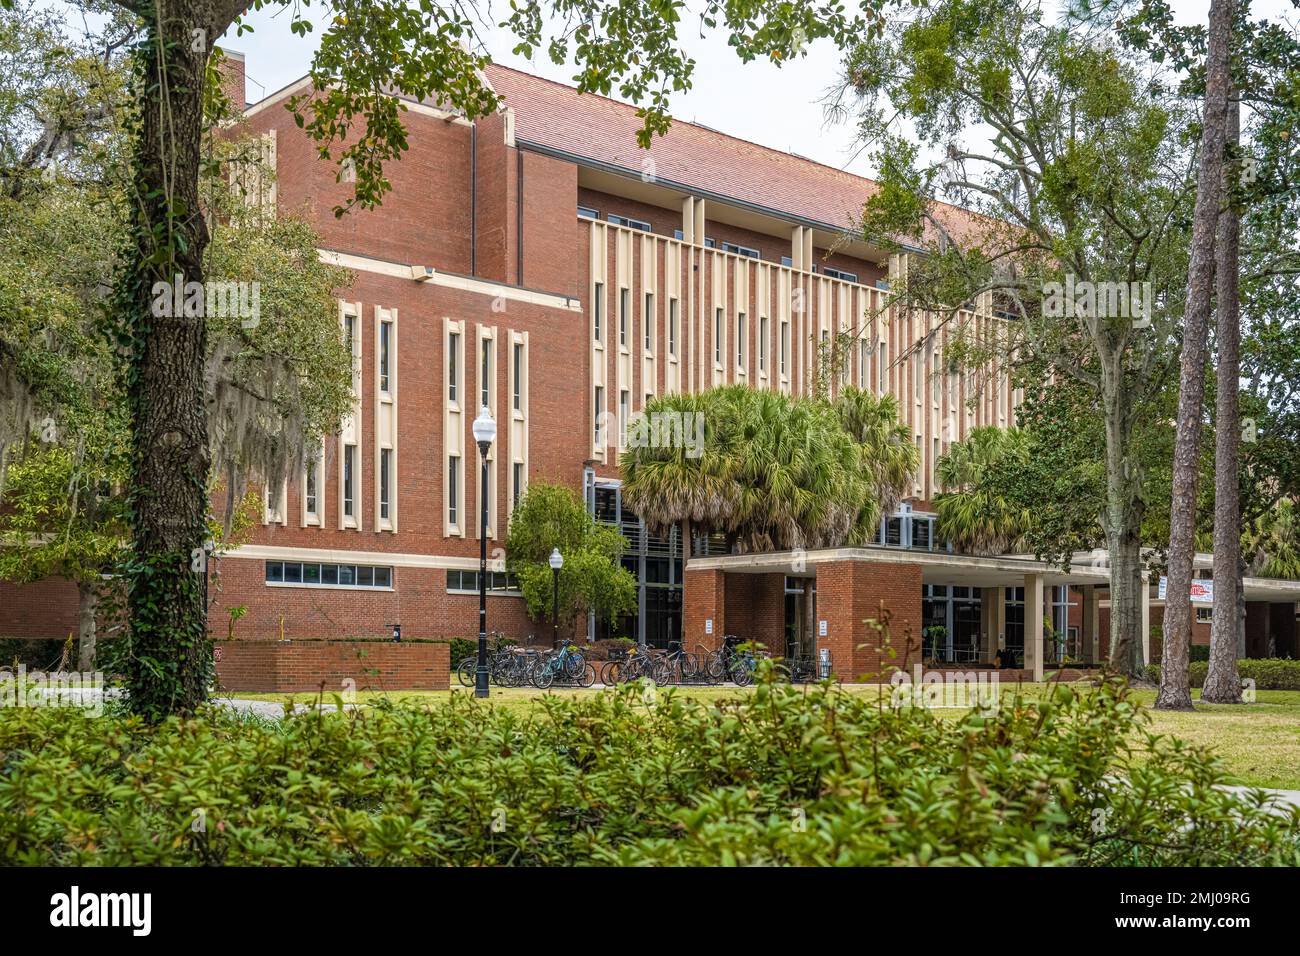 The University of Florida's Library West, part of the George A. Smathers Libraries, adjoining the Plaza of The Americas on the UF campus. (USA) Stock Photo